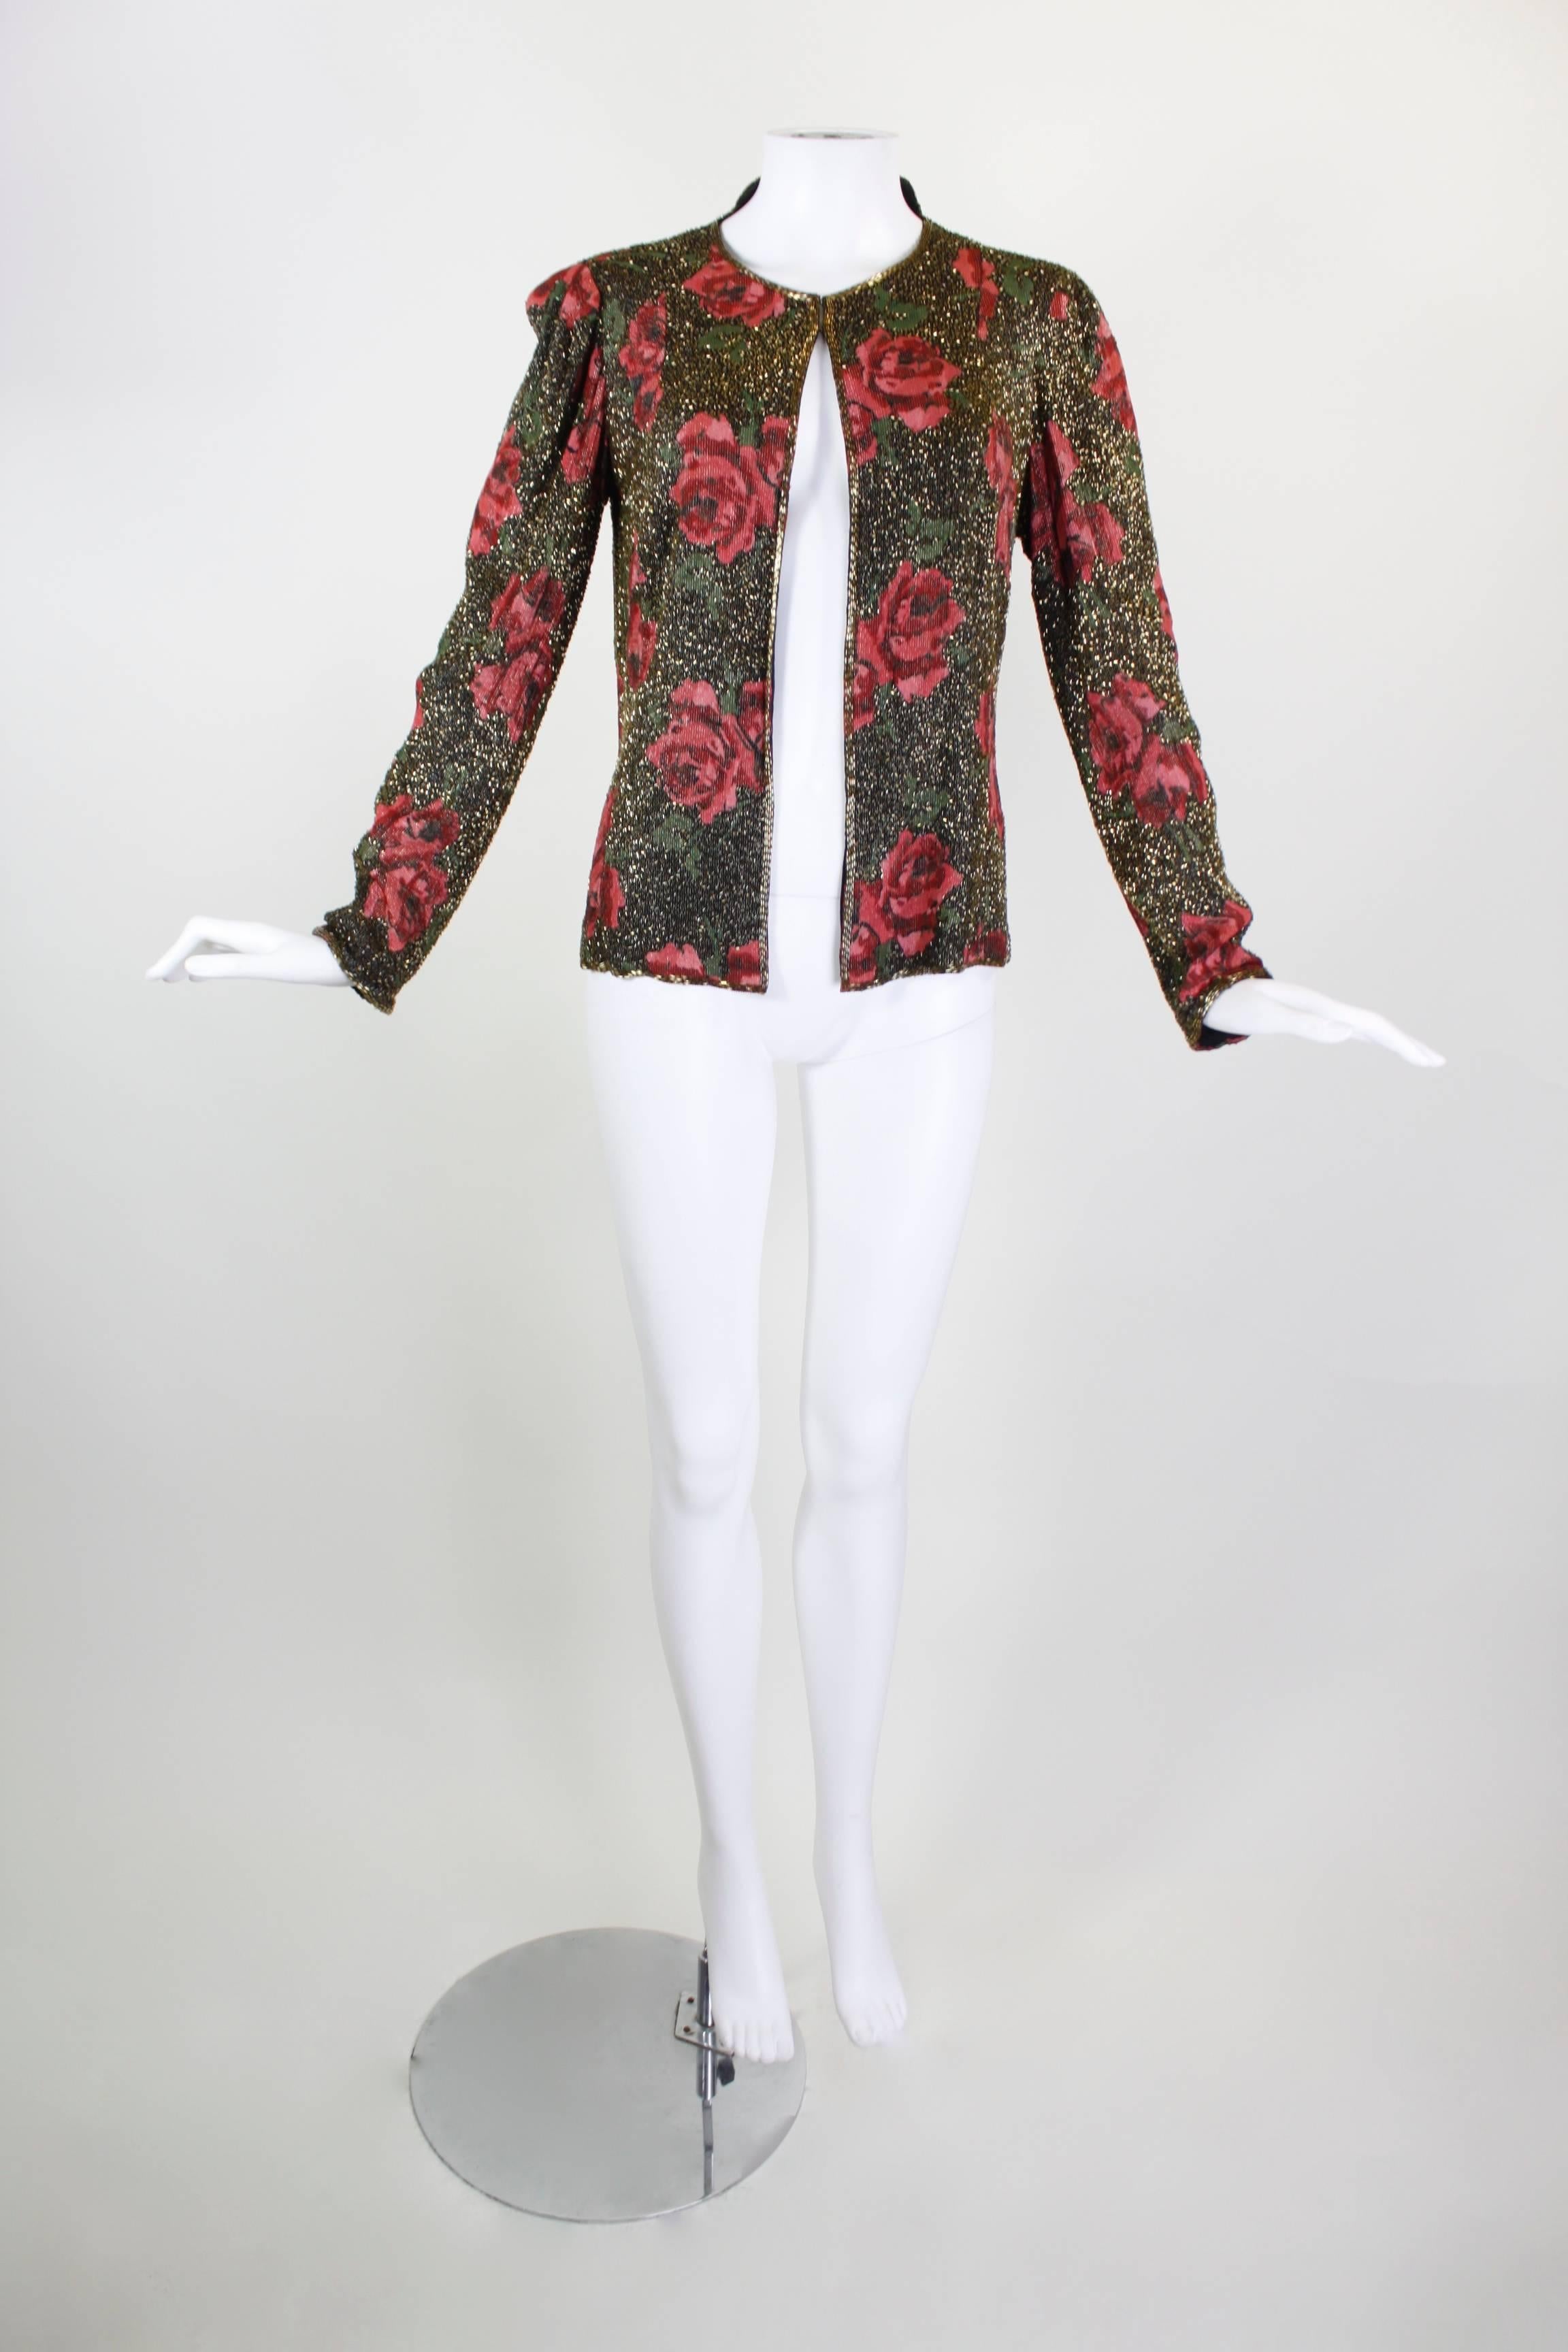 This gorgeous evening jacket from the 1930s features a bold rose print, woven with metallic gold thread. Small gold bugle beads decorate the entire jacket, sewn on the diagonal to add texture and a major sparkle factor. The collar covers only the